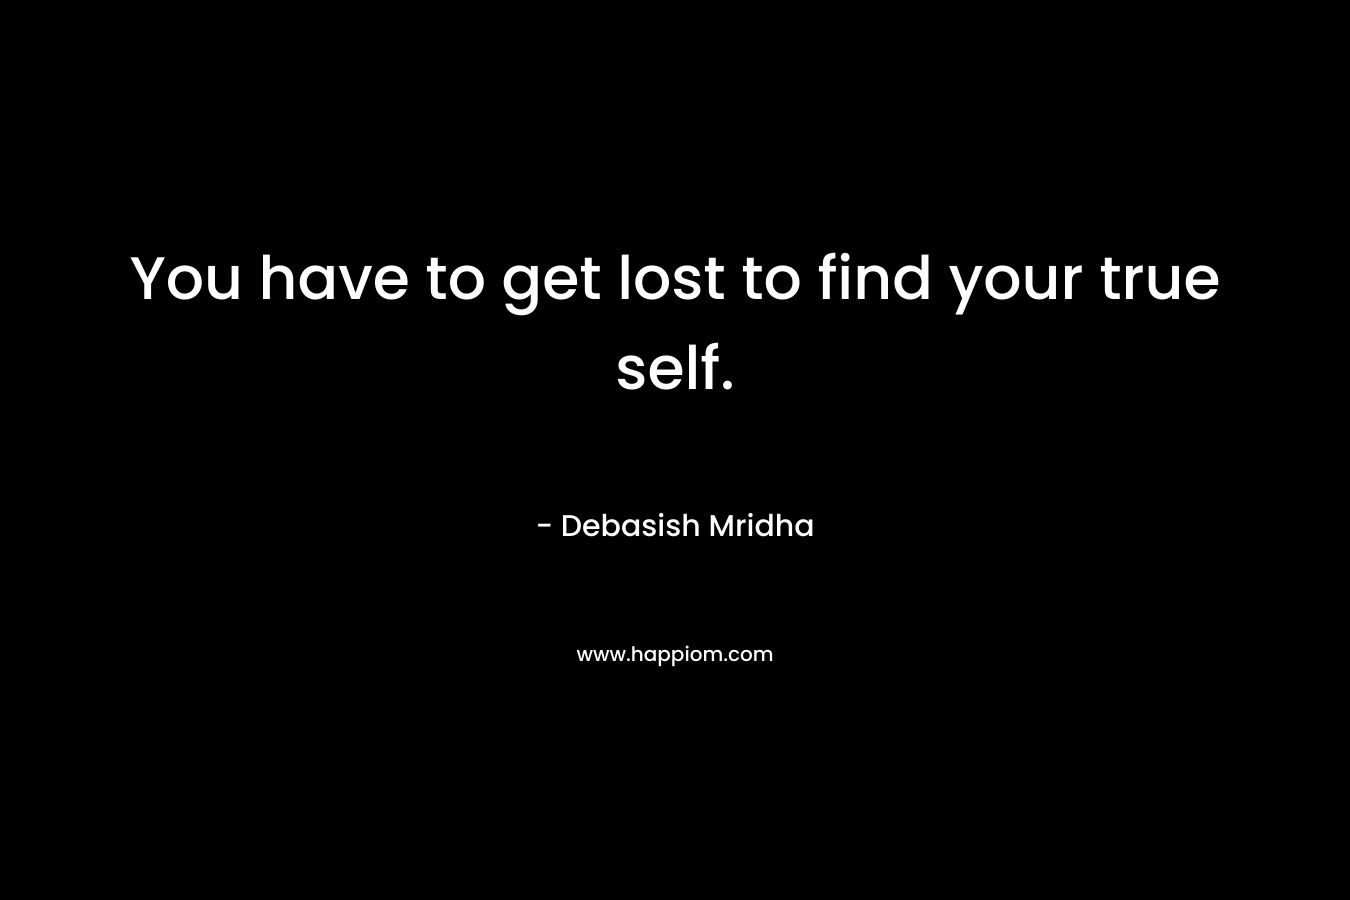 You have to get lost to find your true self.